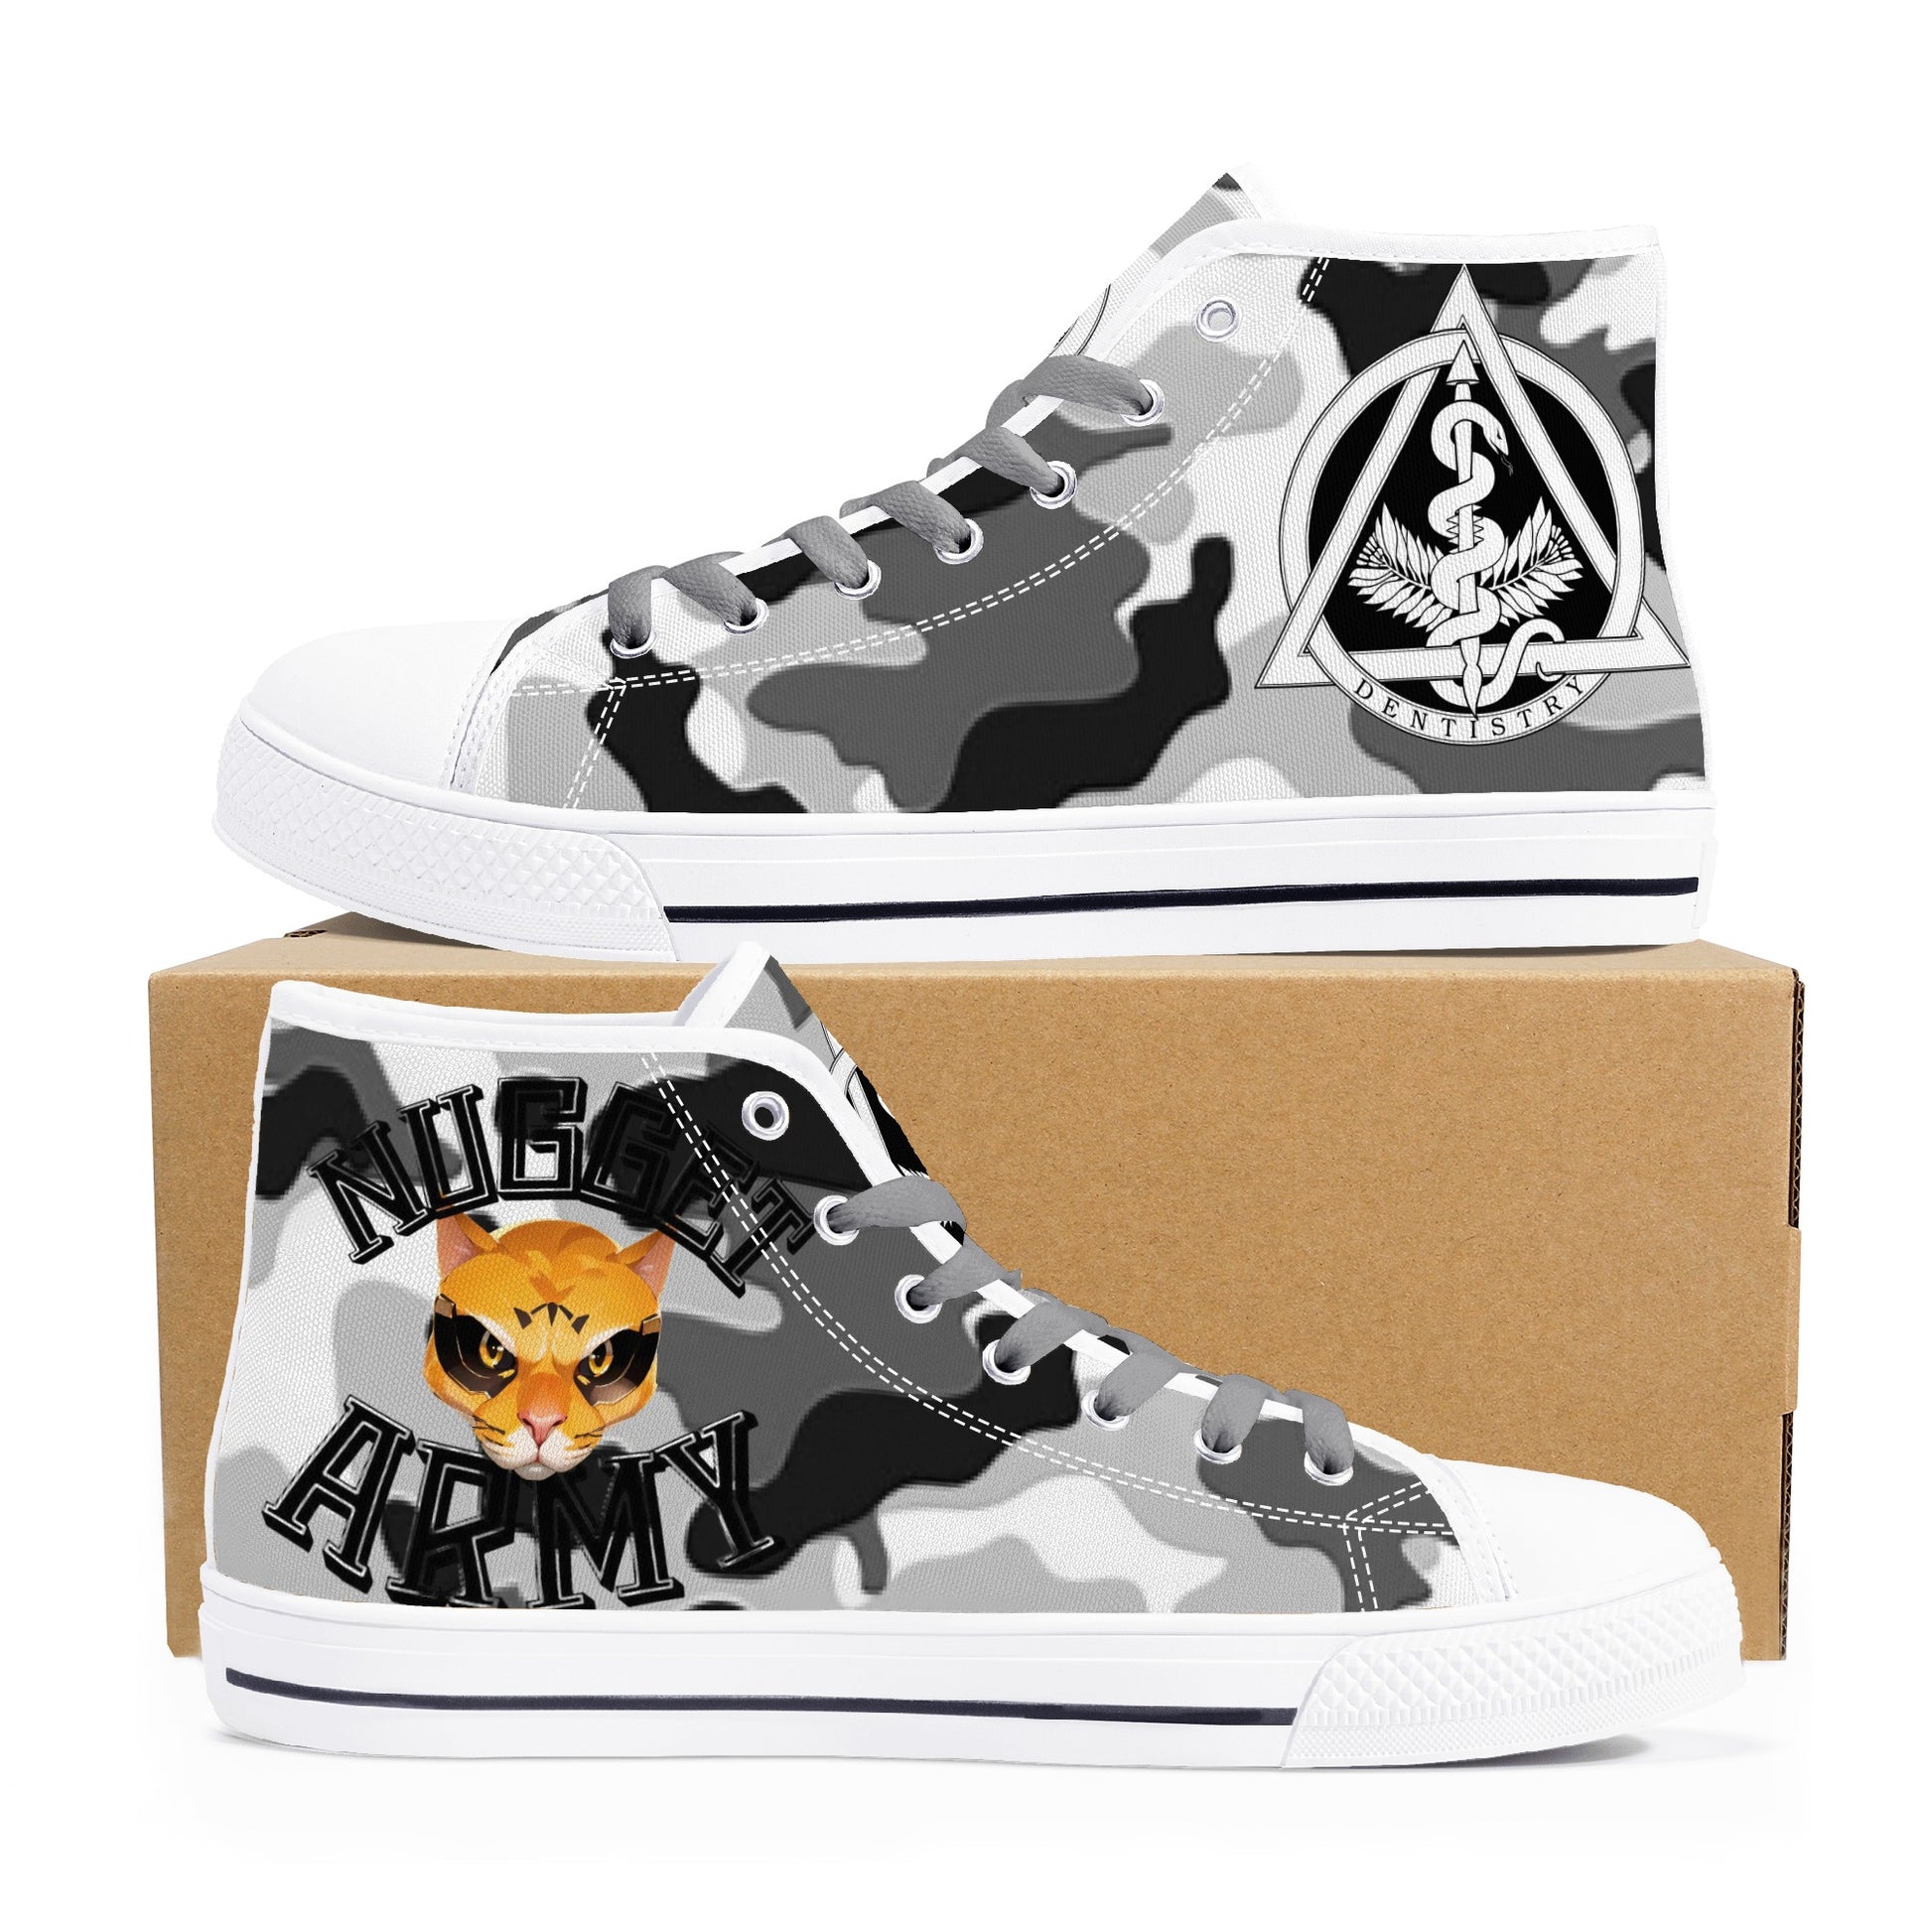 Stand out  with the  Nugget Army Dental Womens High Top Canvas Shoes  available at Hey Nugget. Grab yours today!